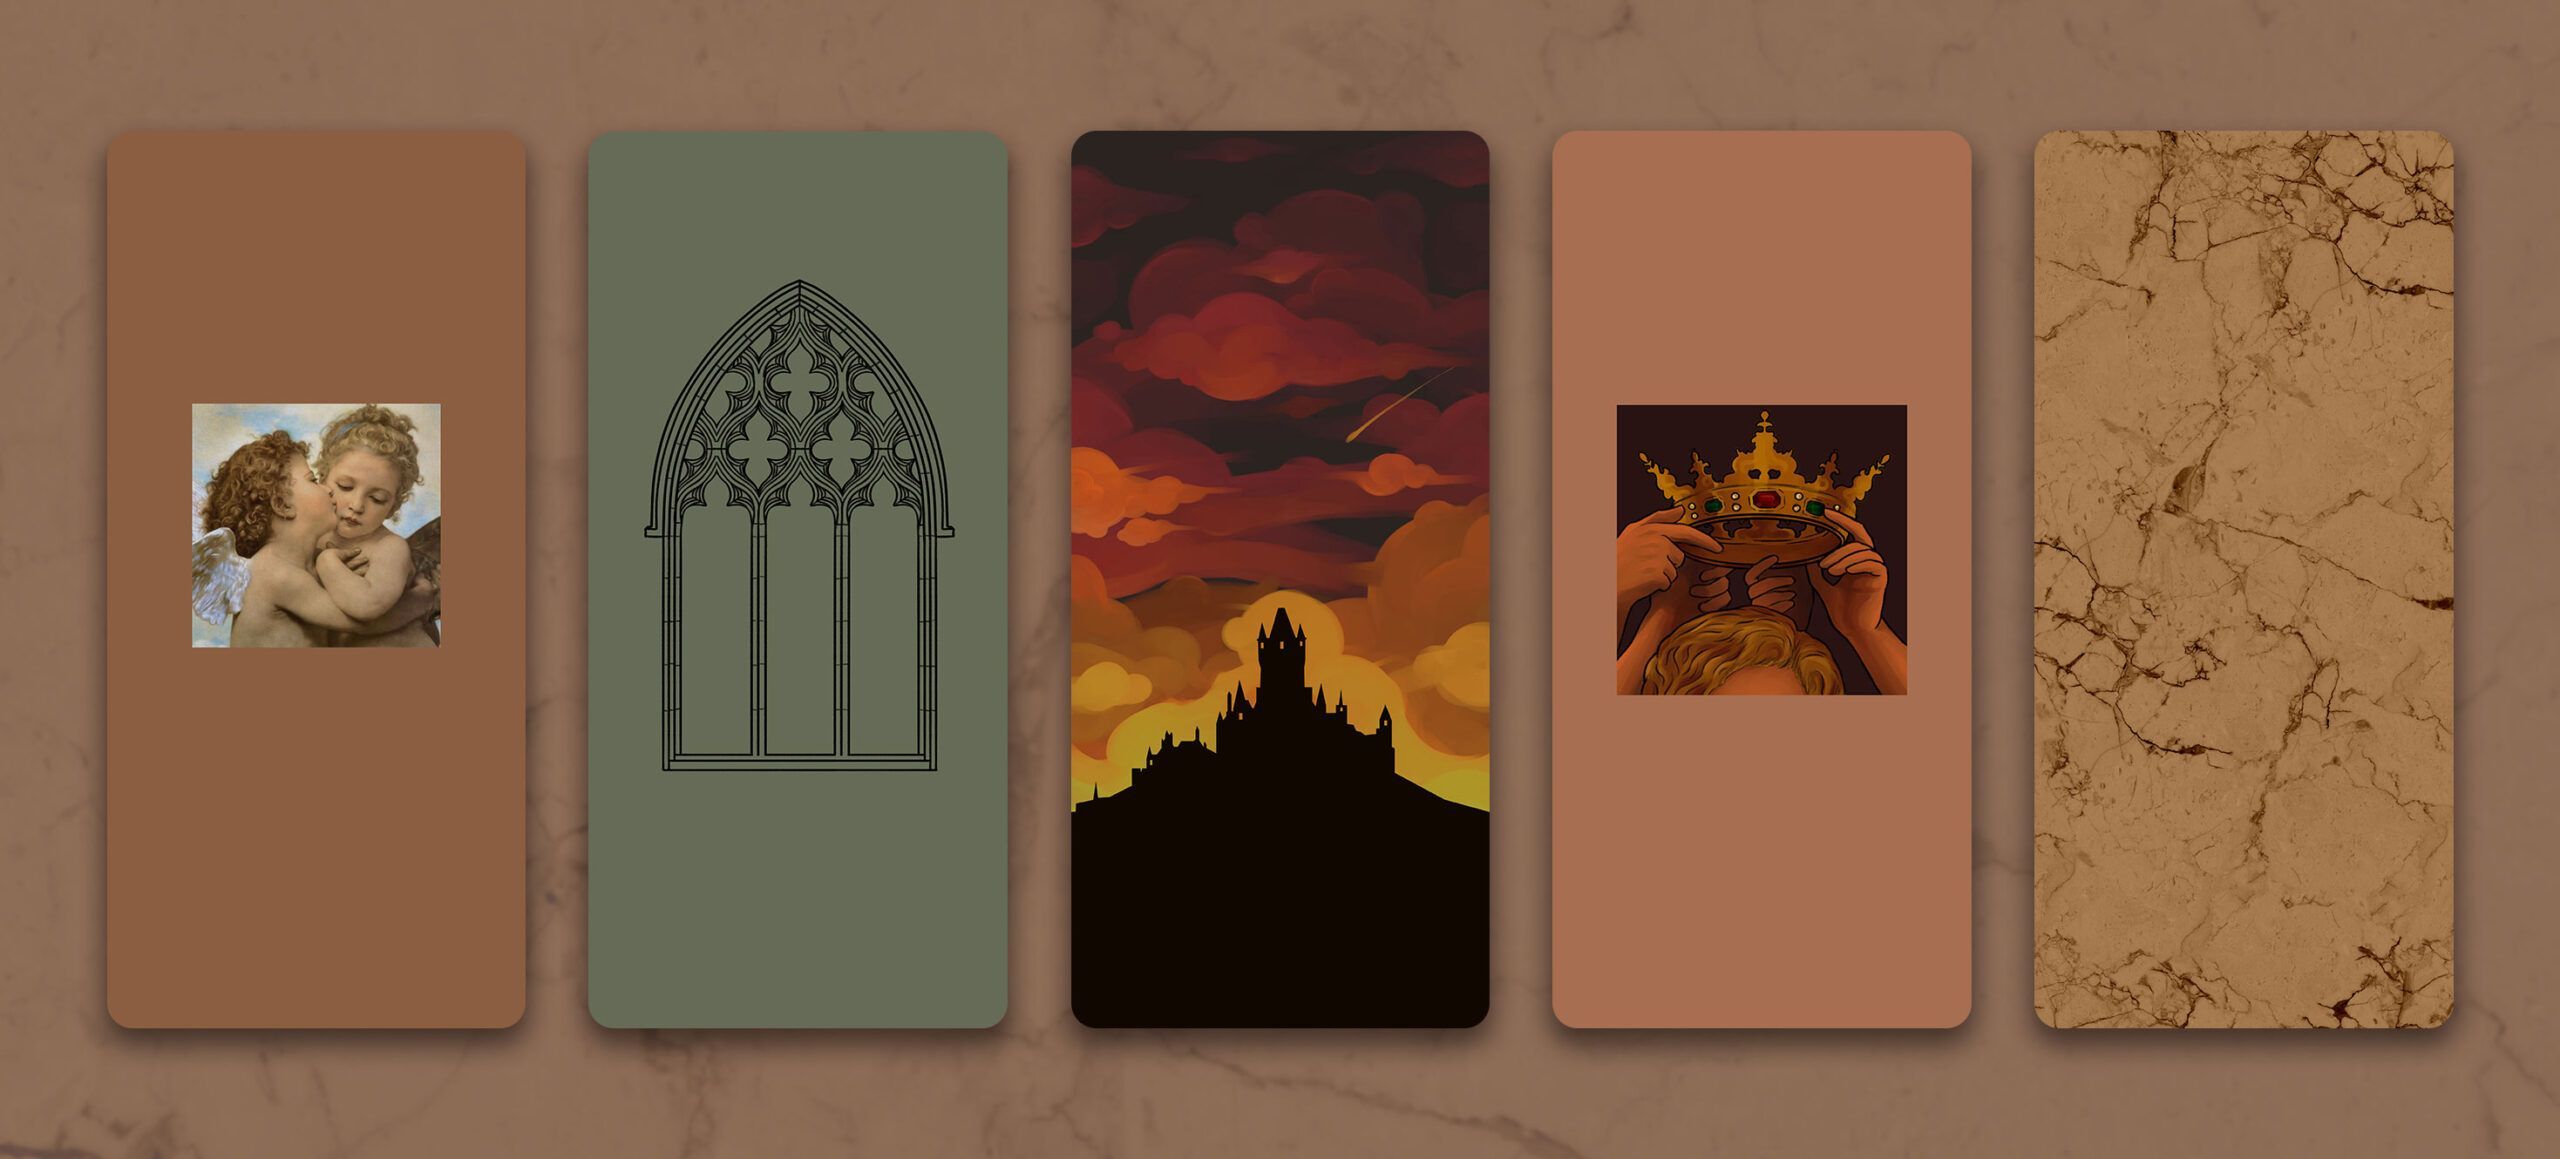 Five tarot cards are displayed on a brown background. - Dark academia